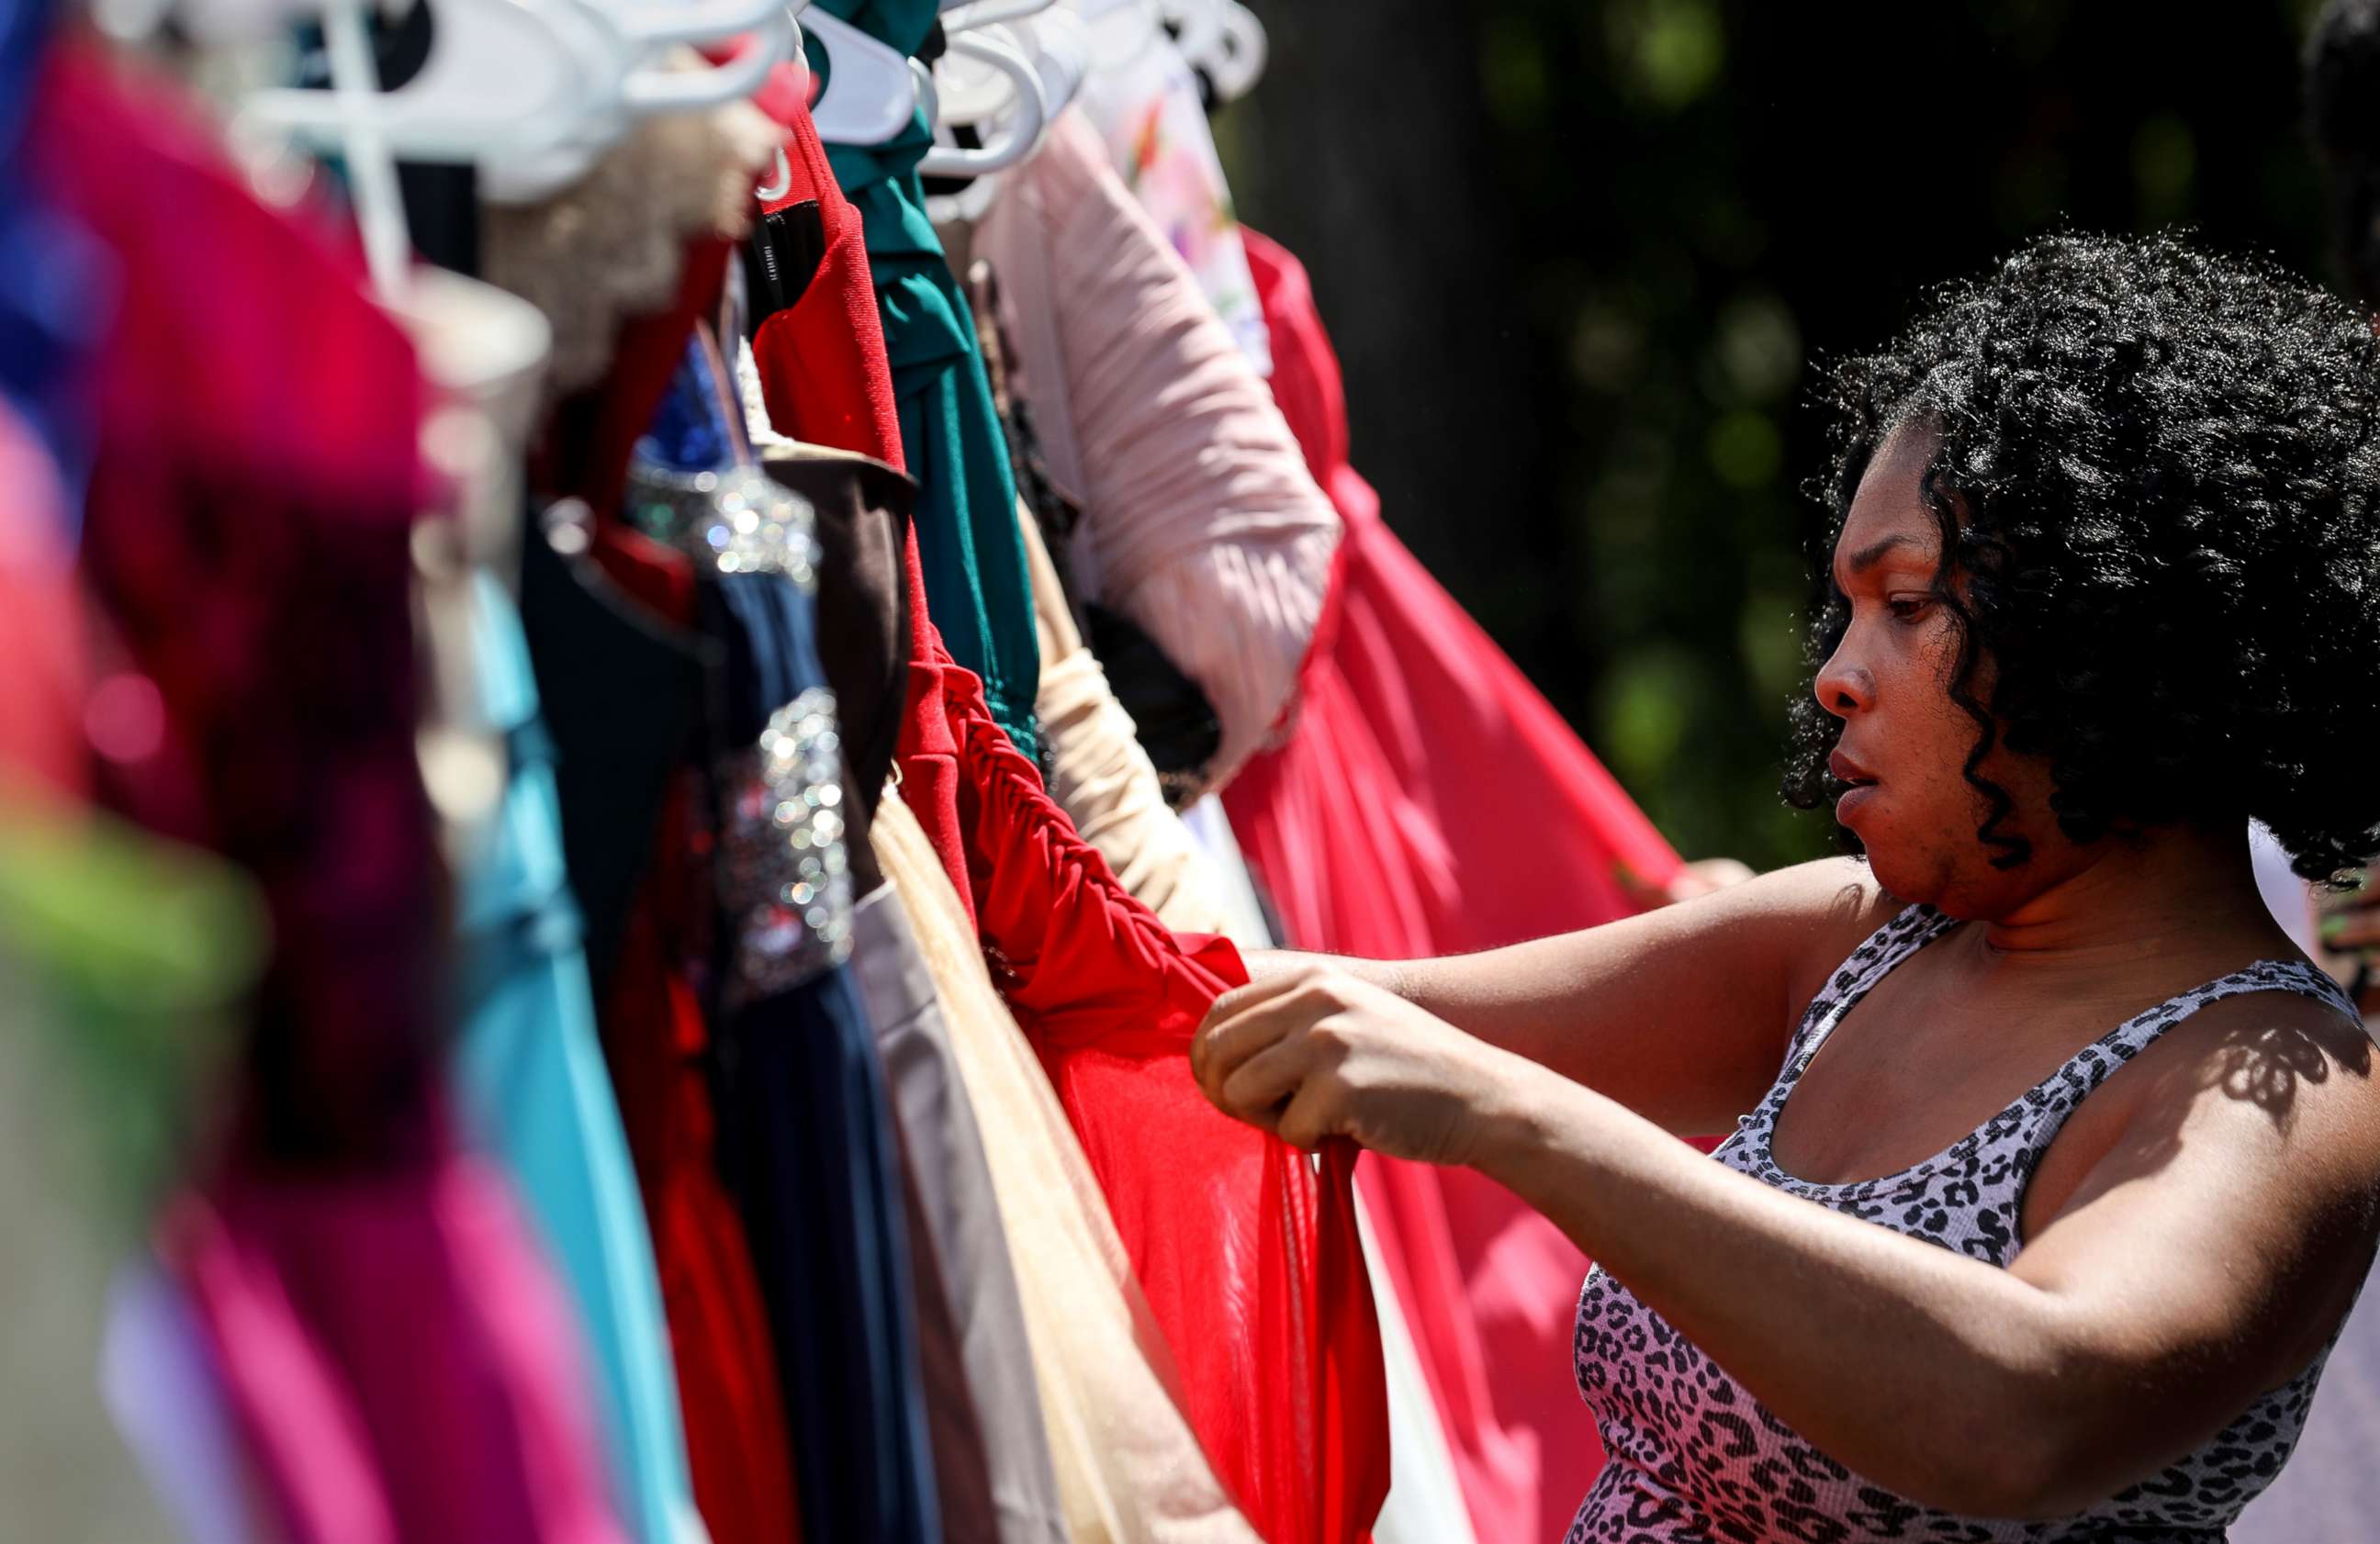 PHOTO: Shyra Moody looks for a homecoming dress for the daughter of a friend who lost everything in Hurricane Harvey, at the home of Tammy Reel, Sept. 24, 2017, in Spring, Texas.